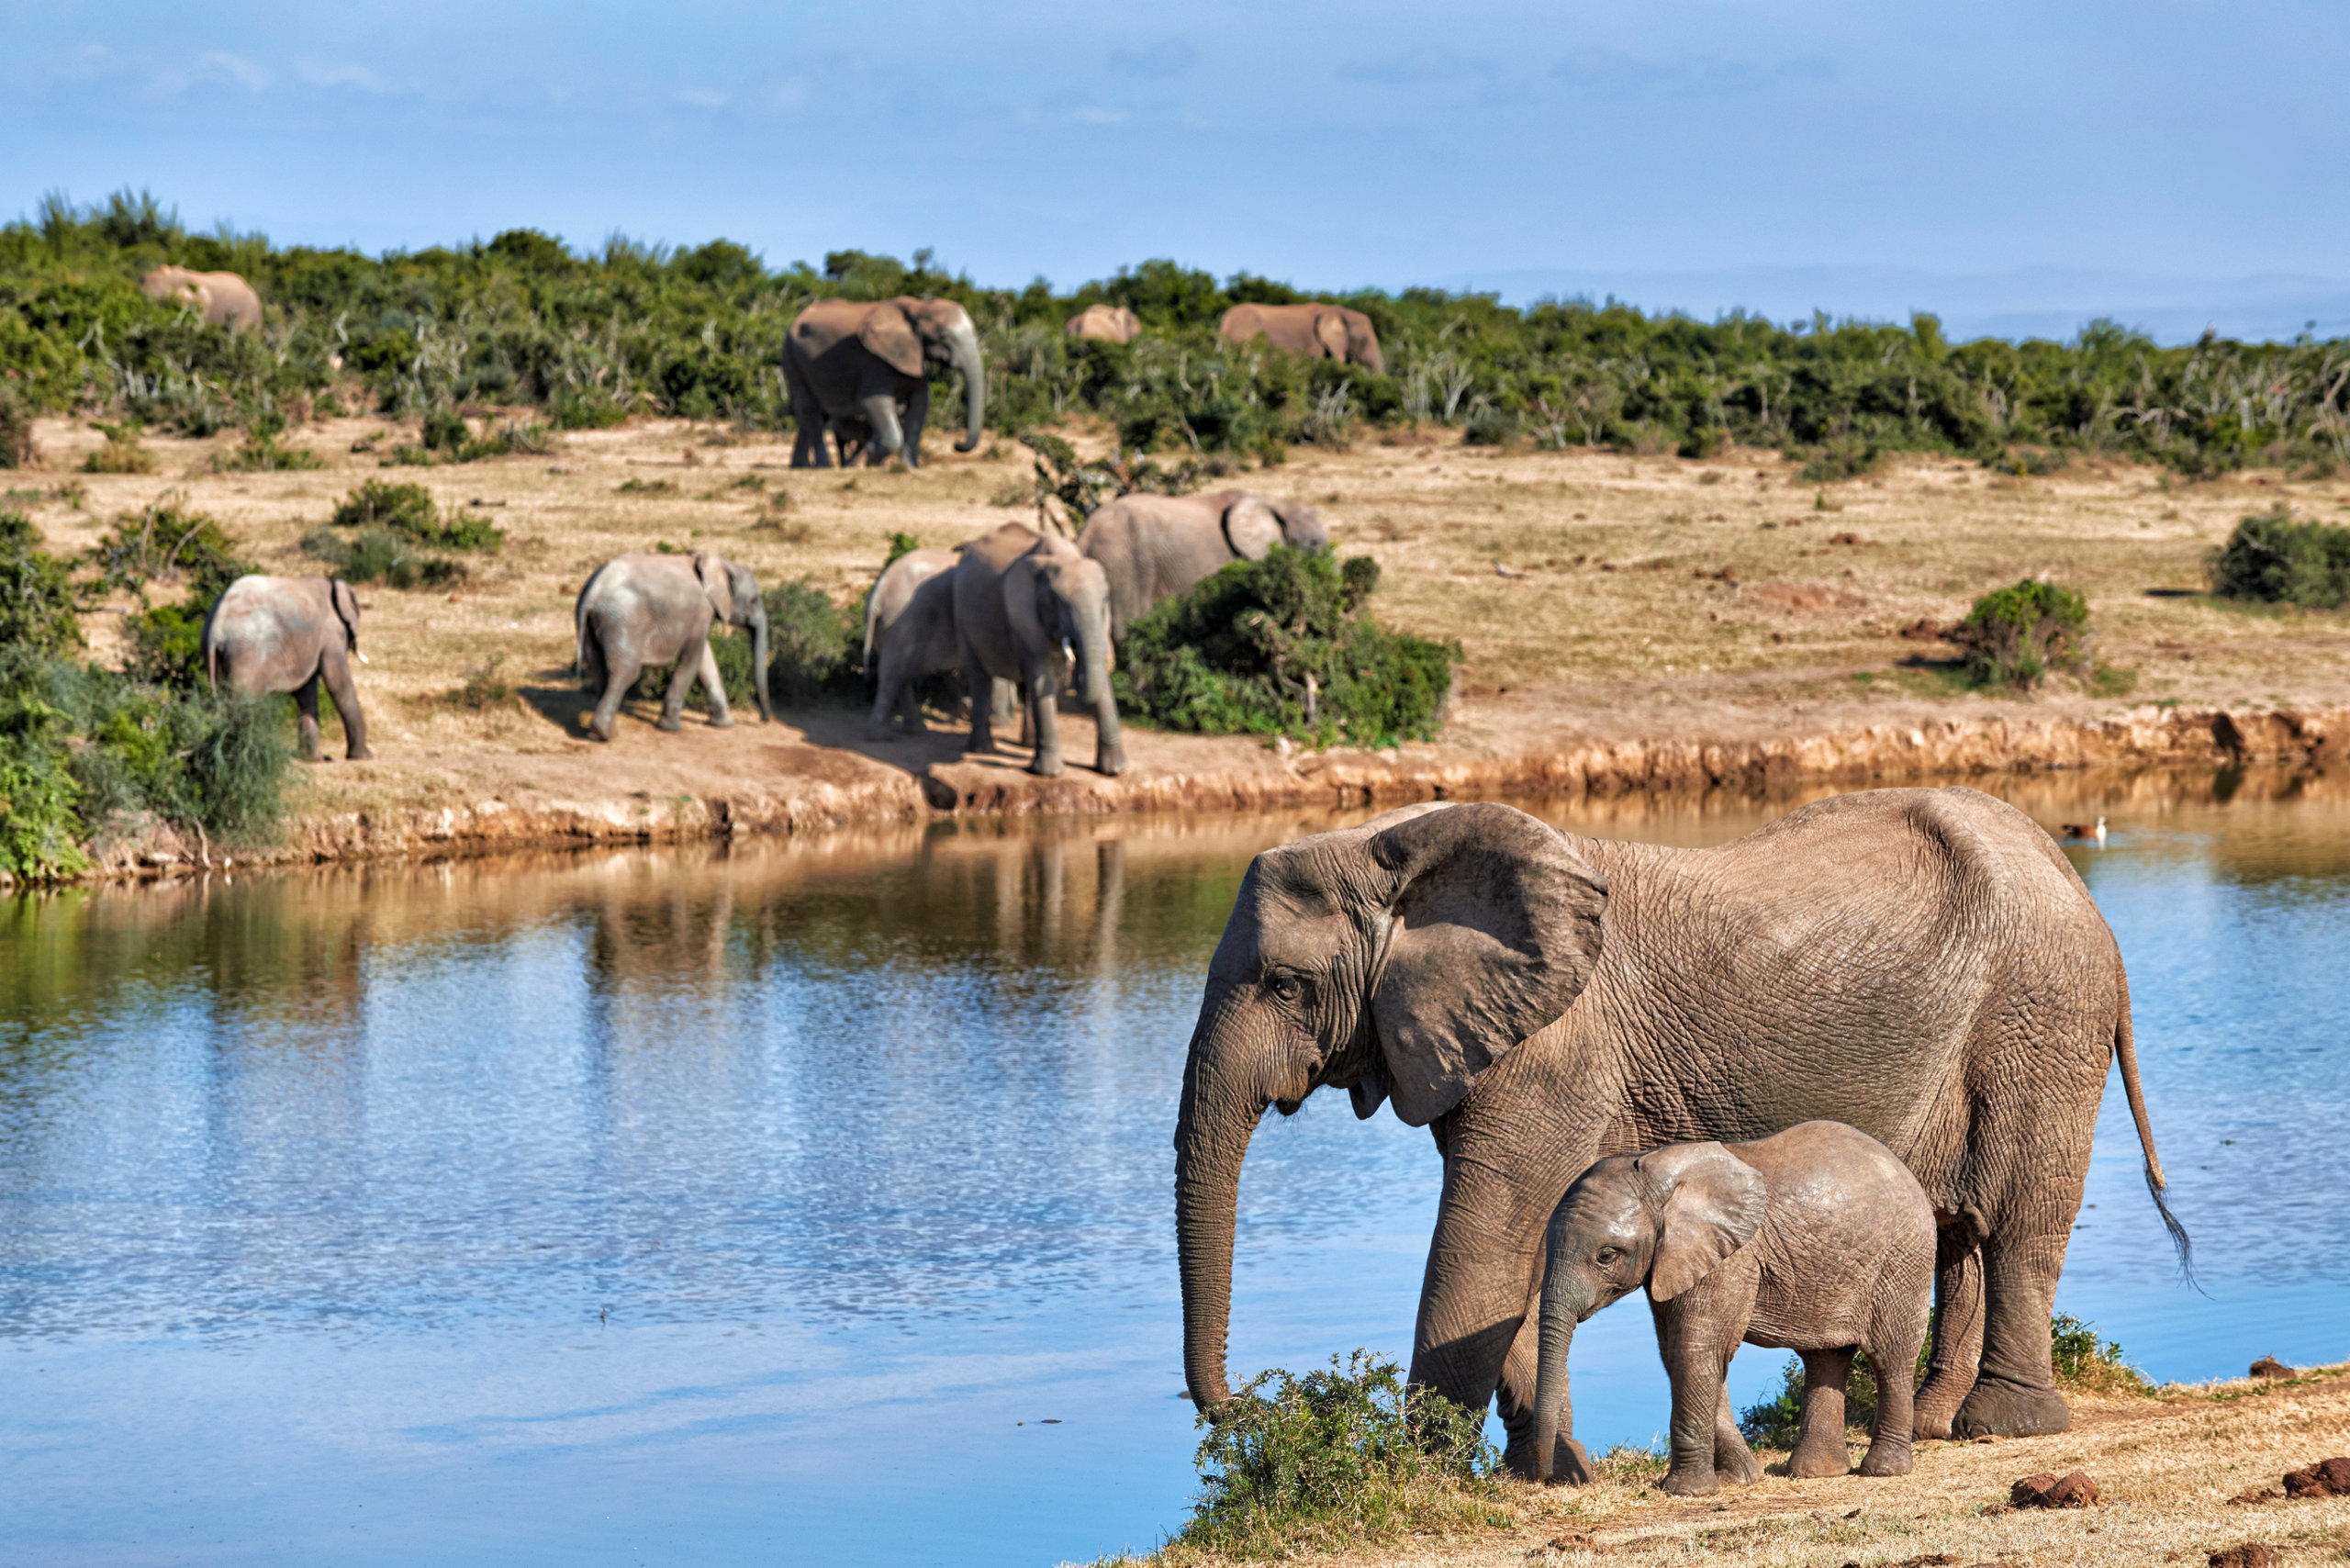 Elephants together in nature